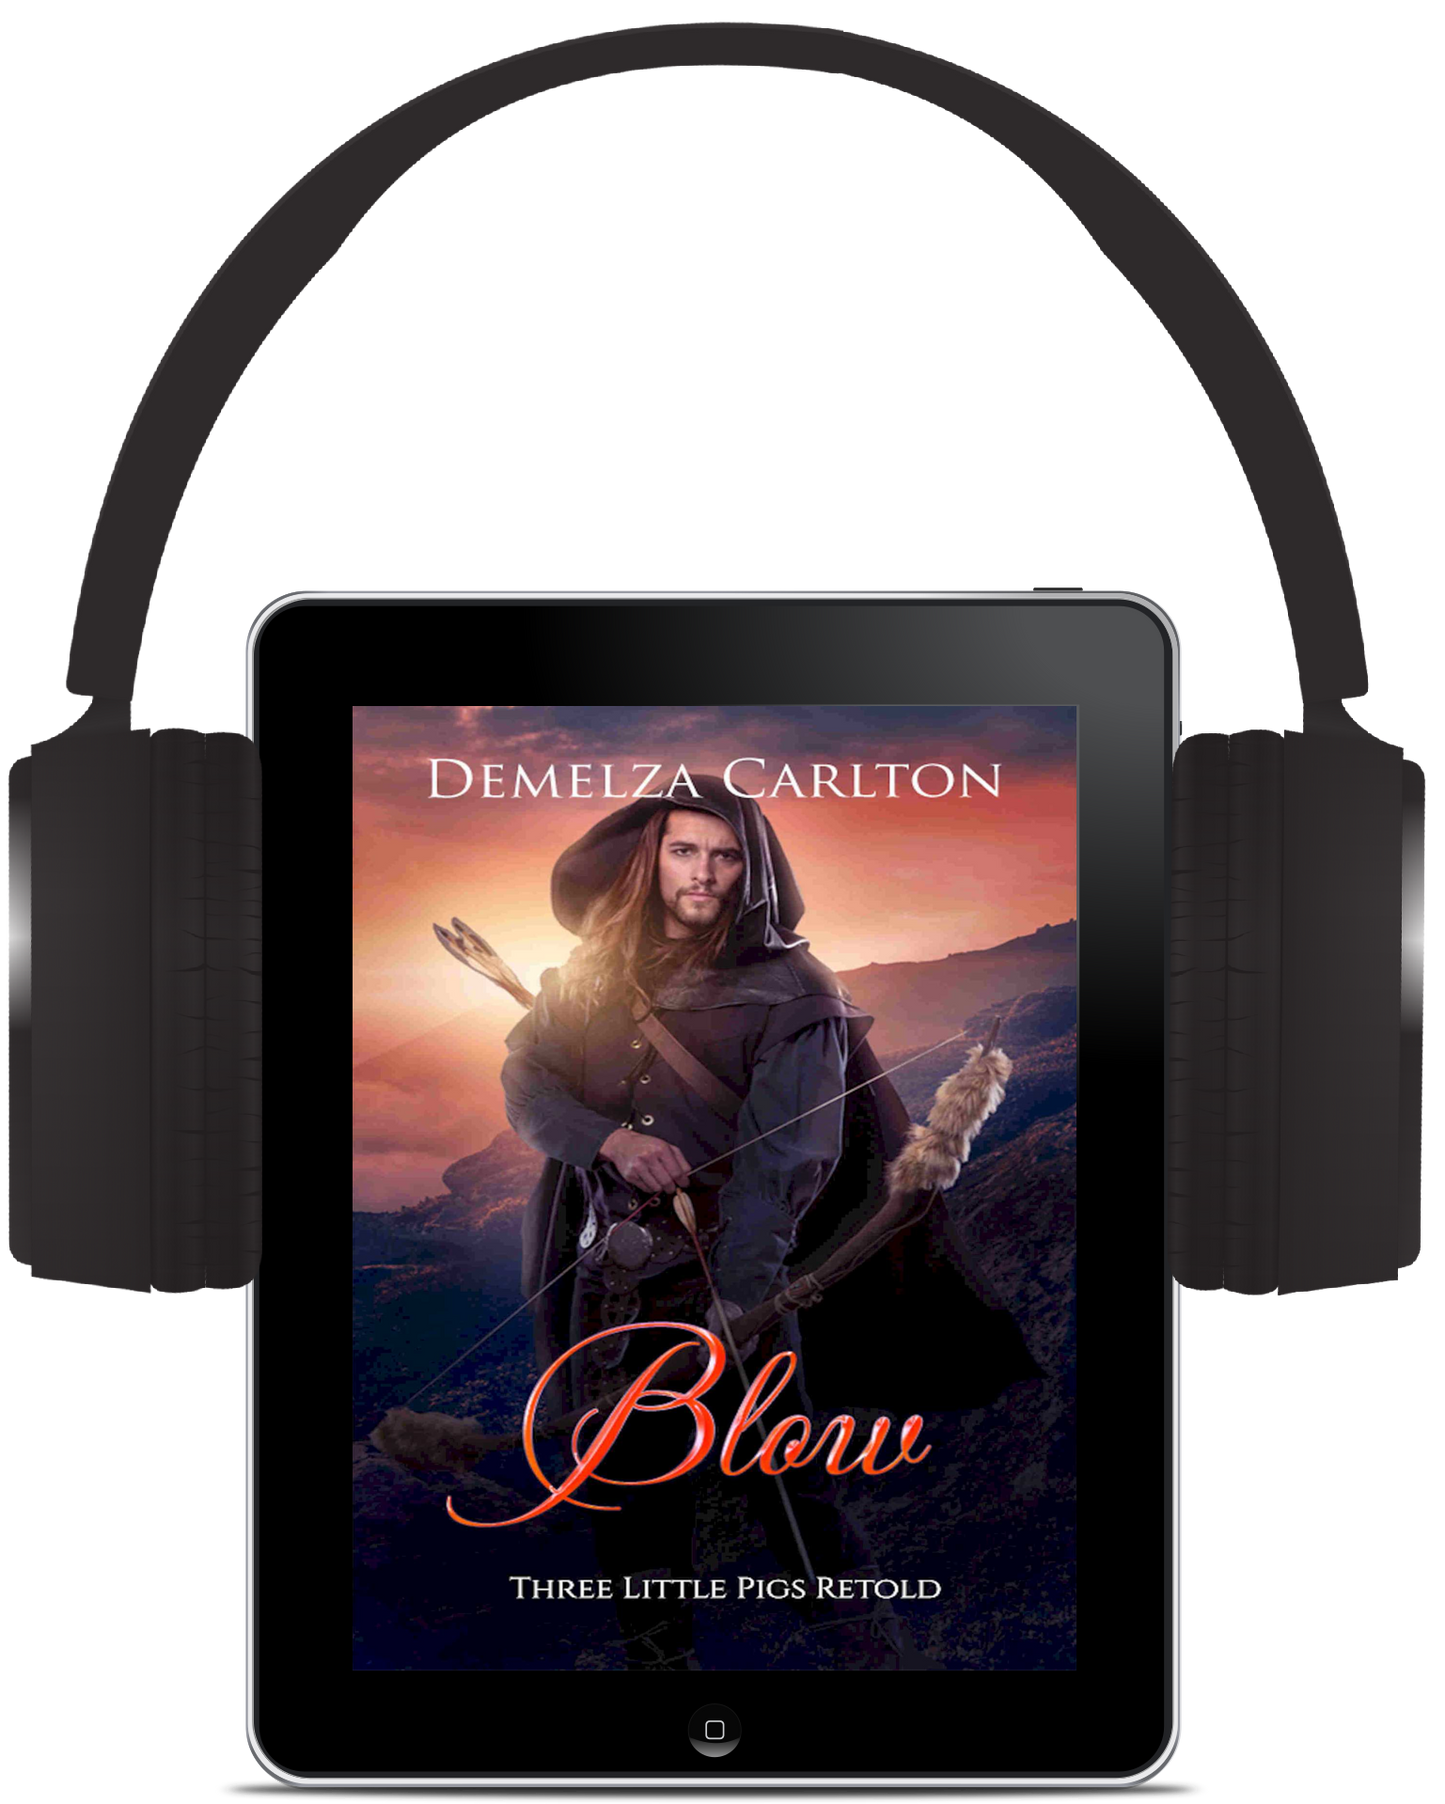 Blow: Three Little Pigs Retold (Book 9 in the Romance a Medieval Fairytale series) AUDIOBOOK